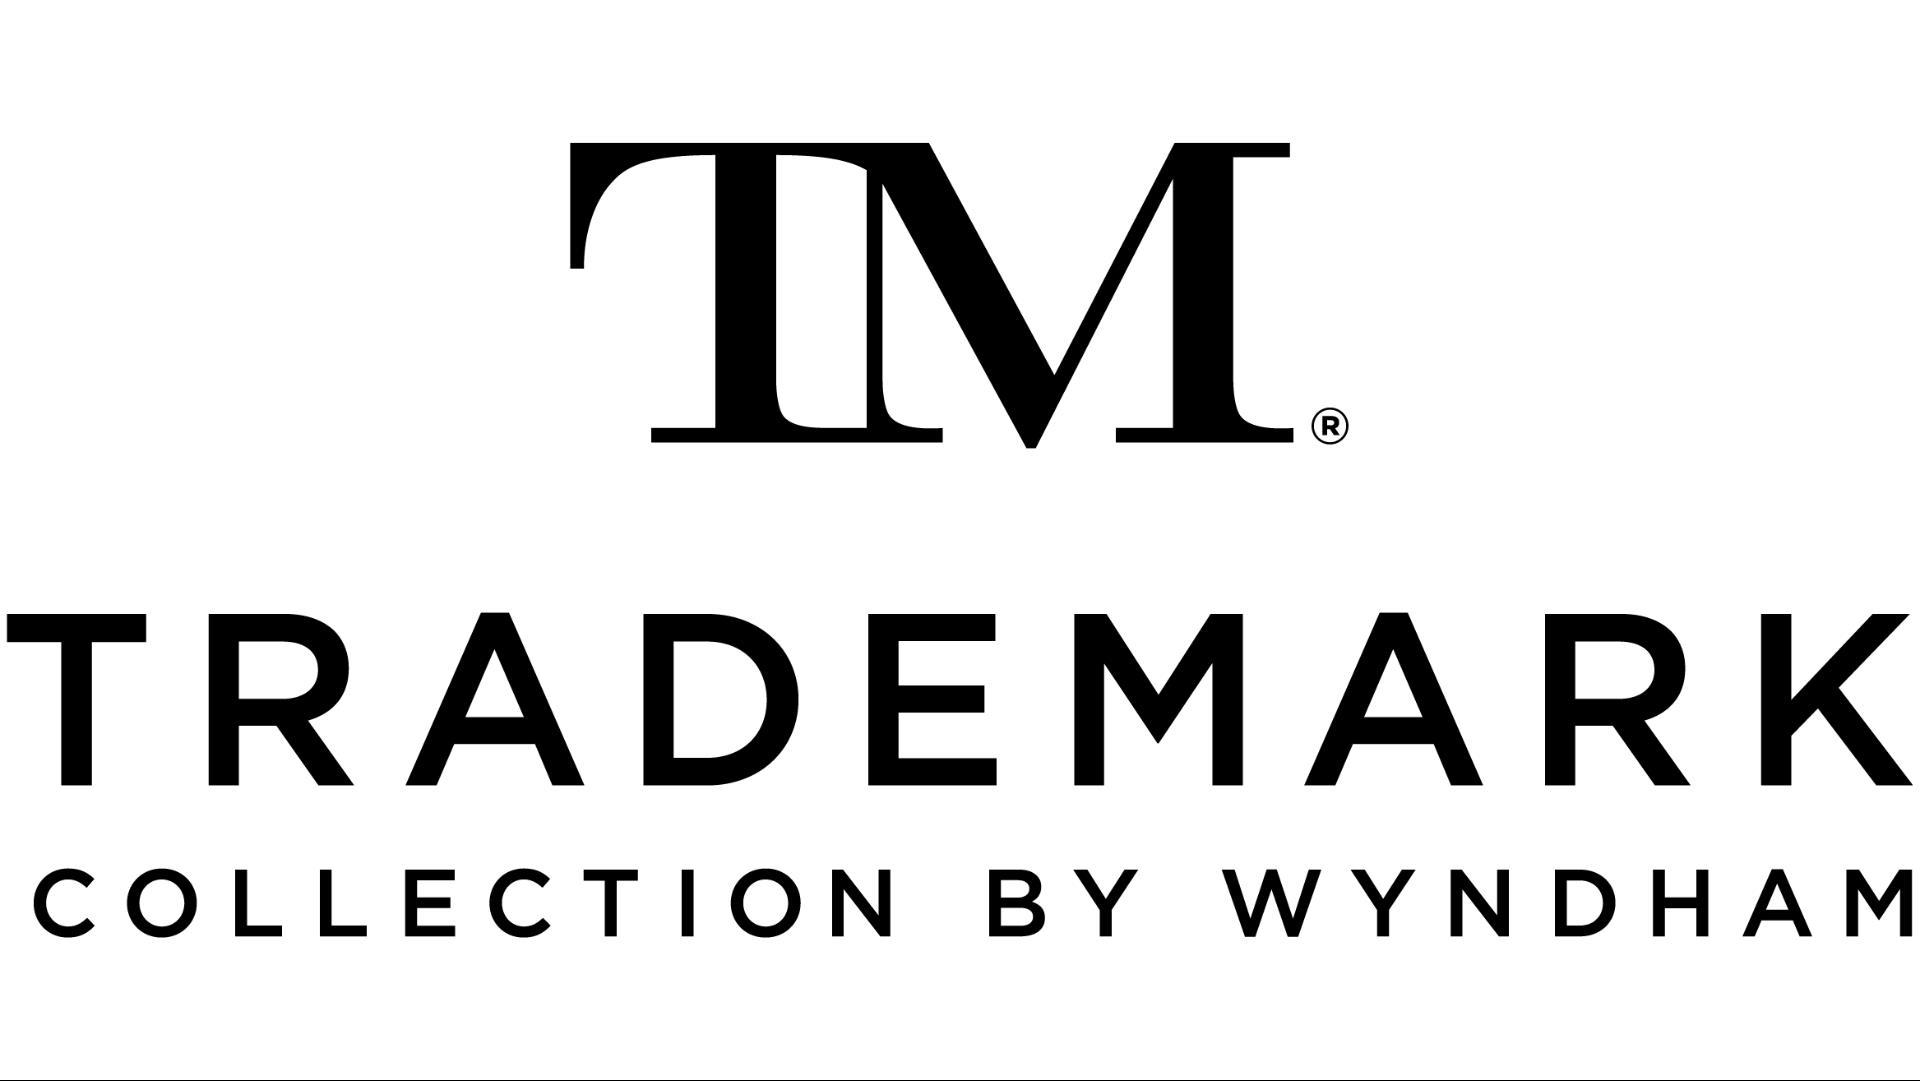 The Beekman Tower, Trademark Collection by Wyndham in New York, NY